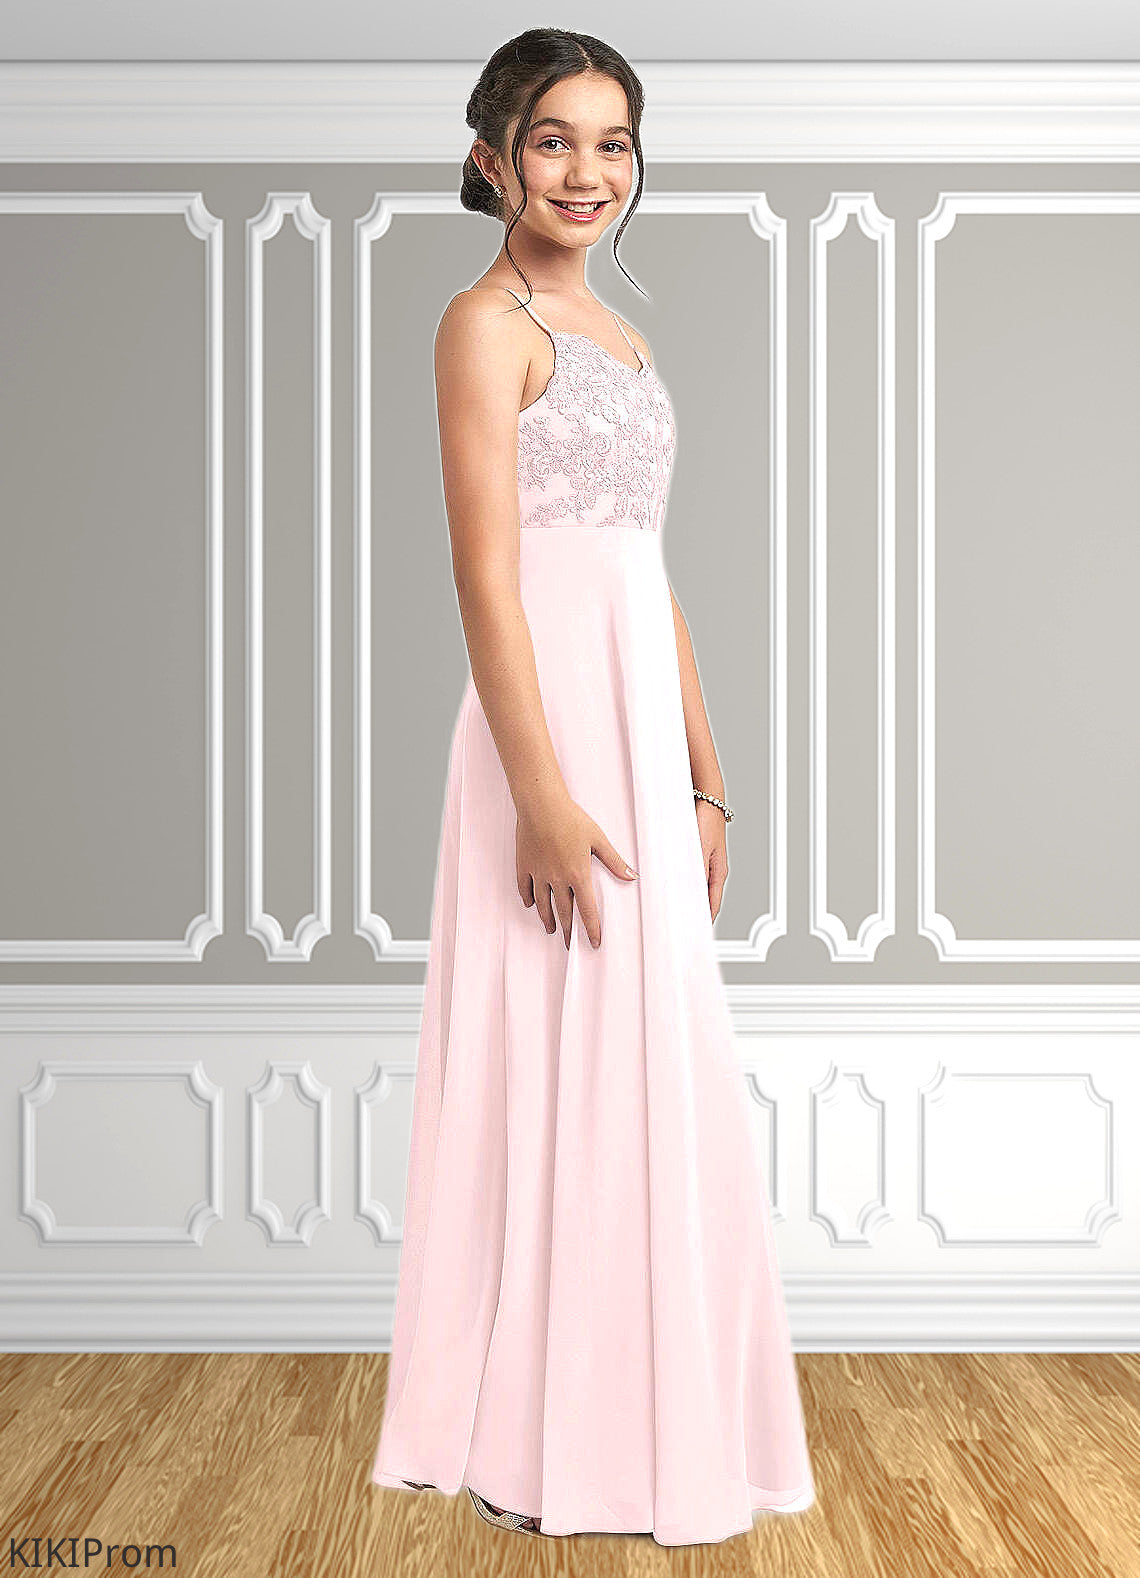 Marely A-Line Lace Chiffon Floor-Length Junior Bridesmaid Dress Blushing Pink DZP0022853